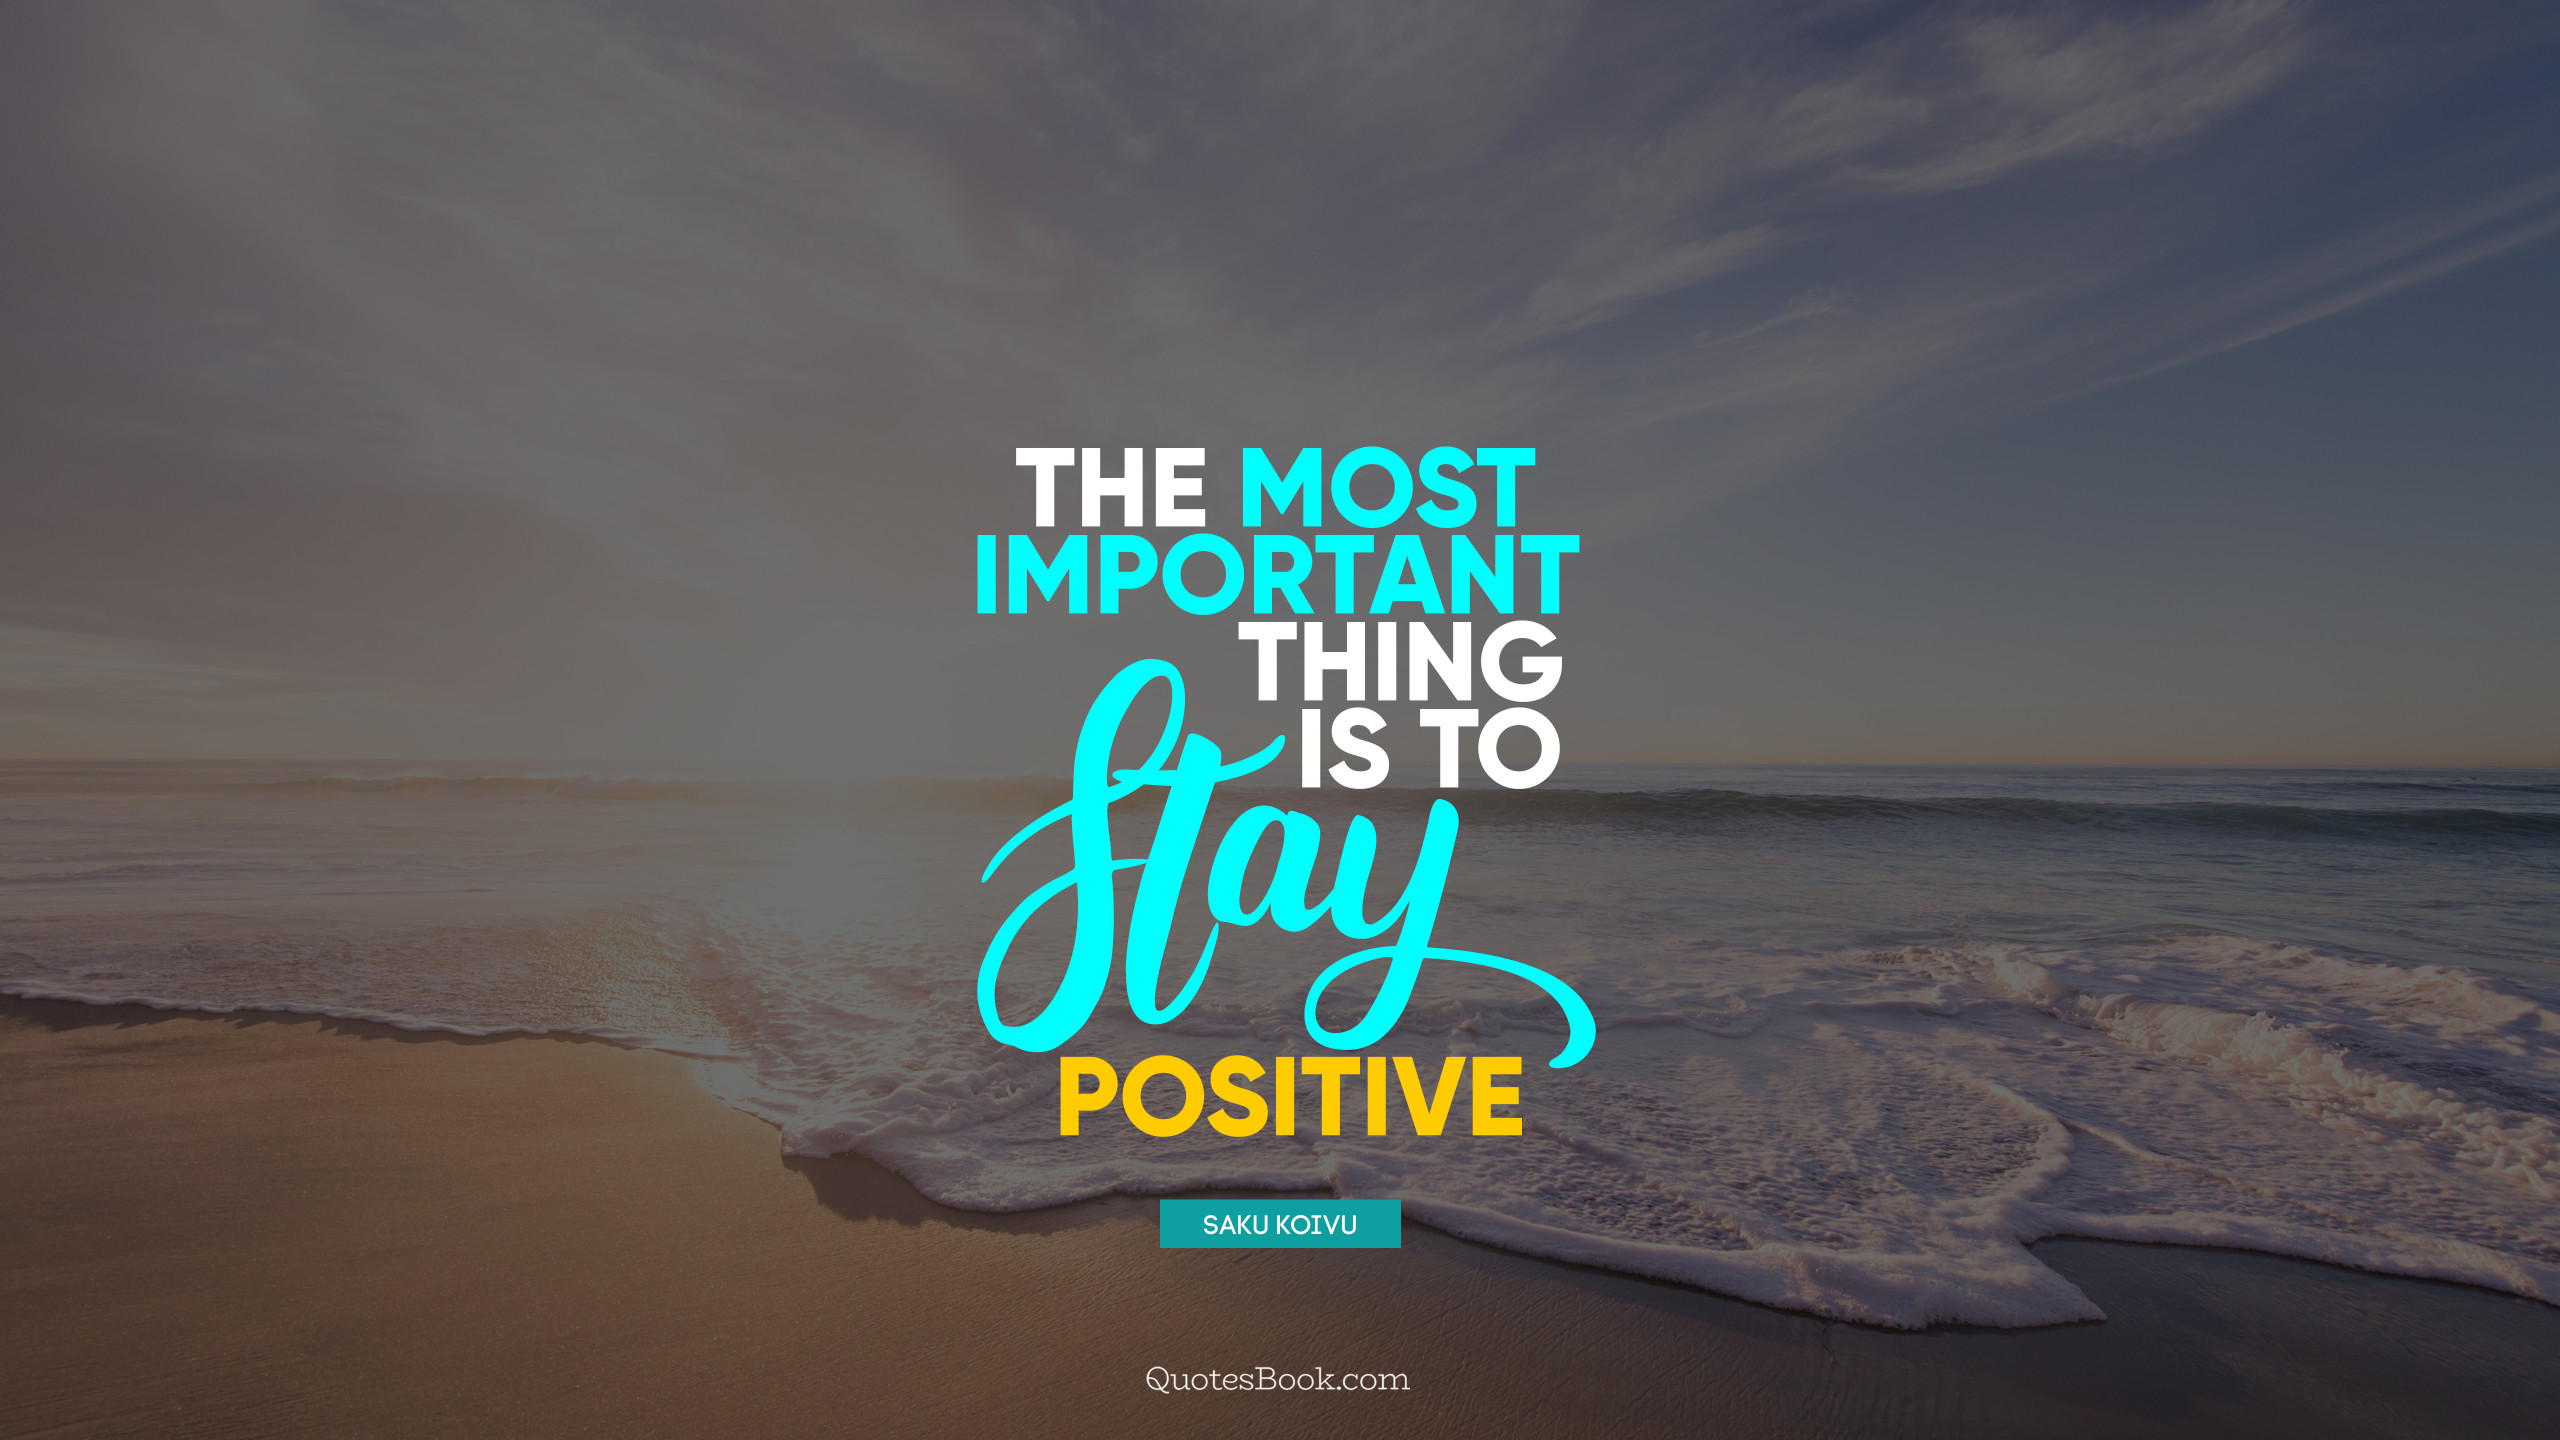 The most important thing is to stay positive. - Quote by Saku Koivu